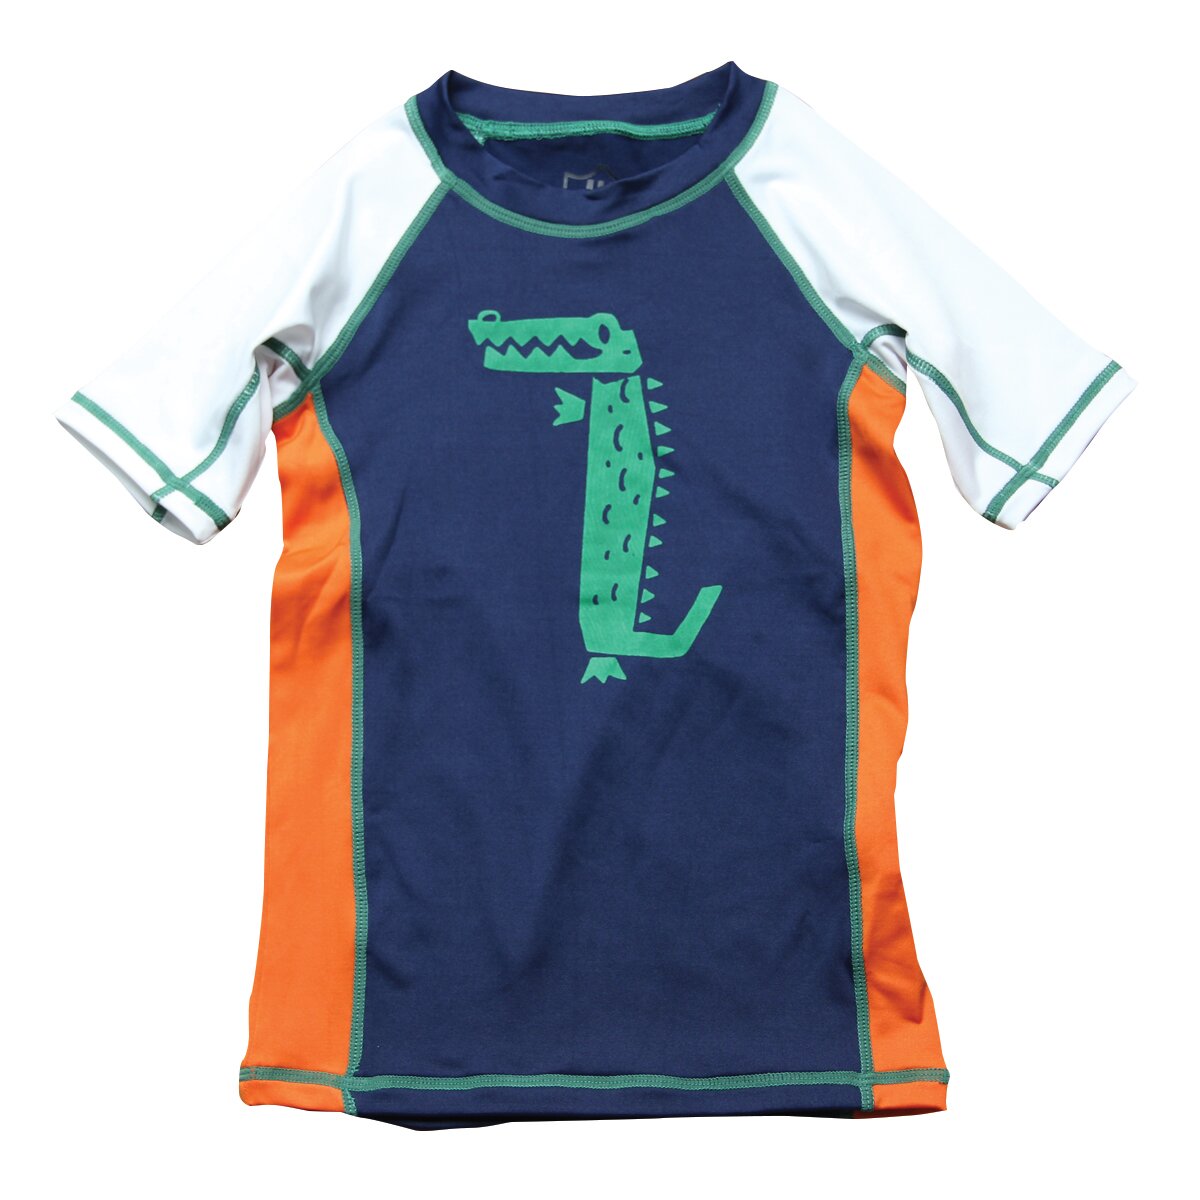 Boys Rash Guards by Wes and Willy (Size: S(8))